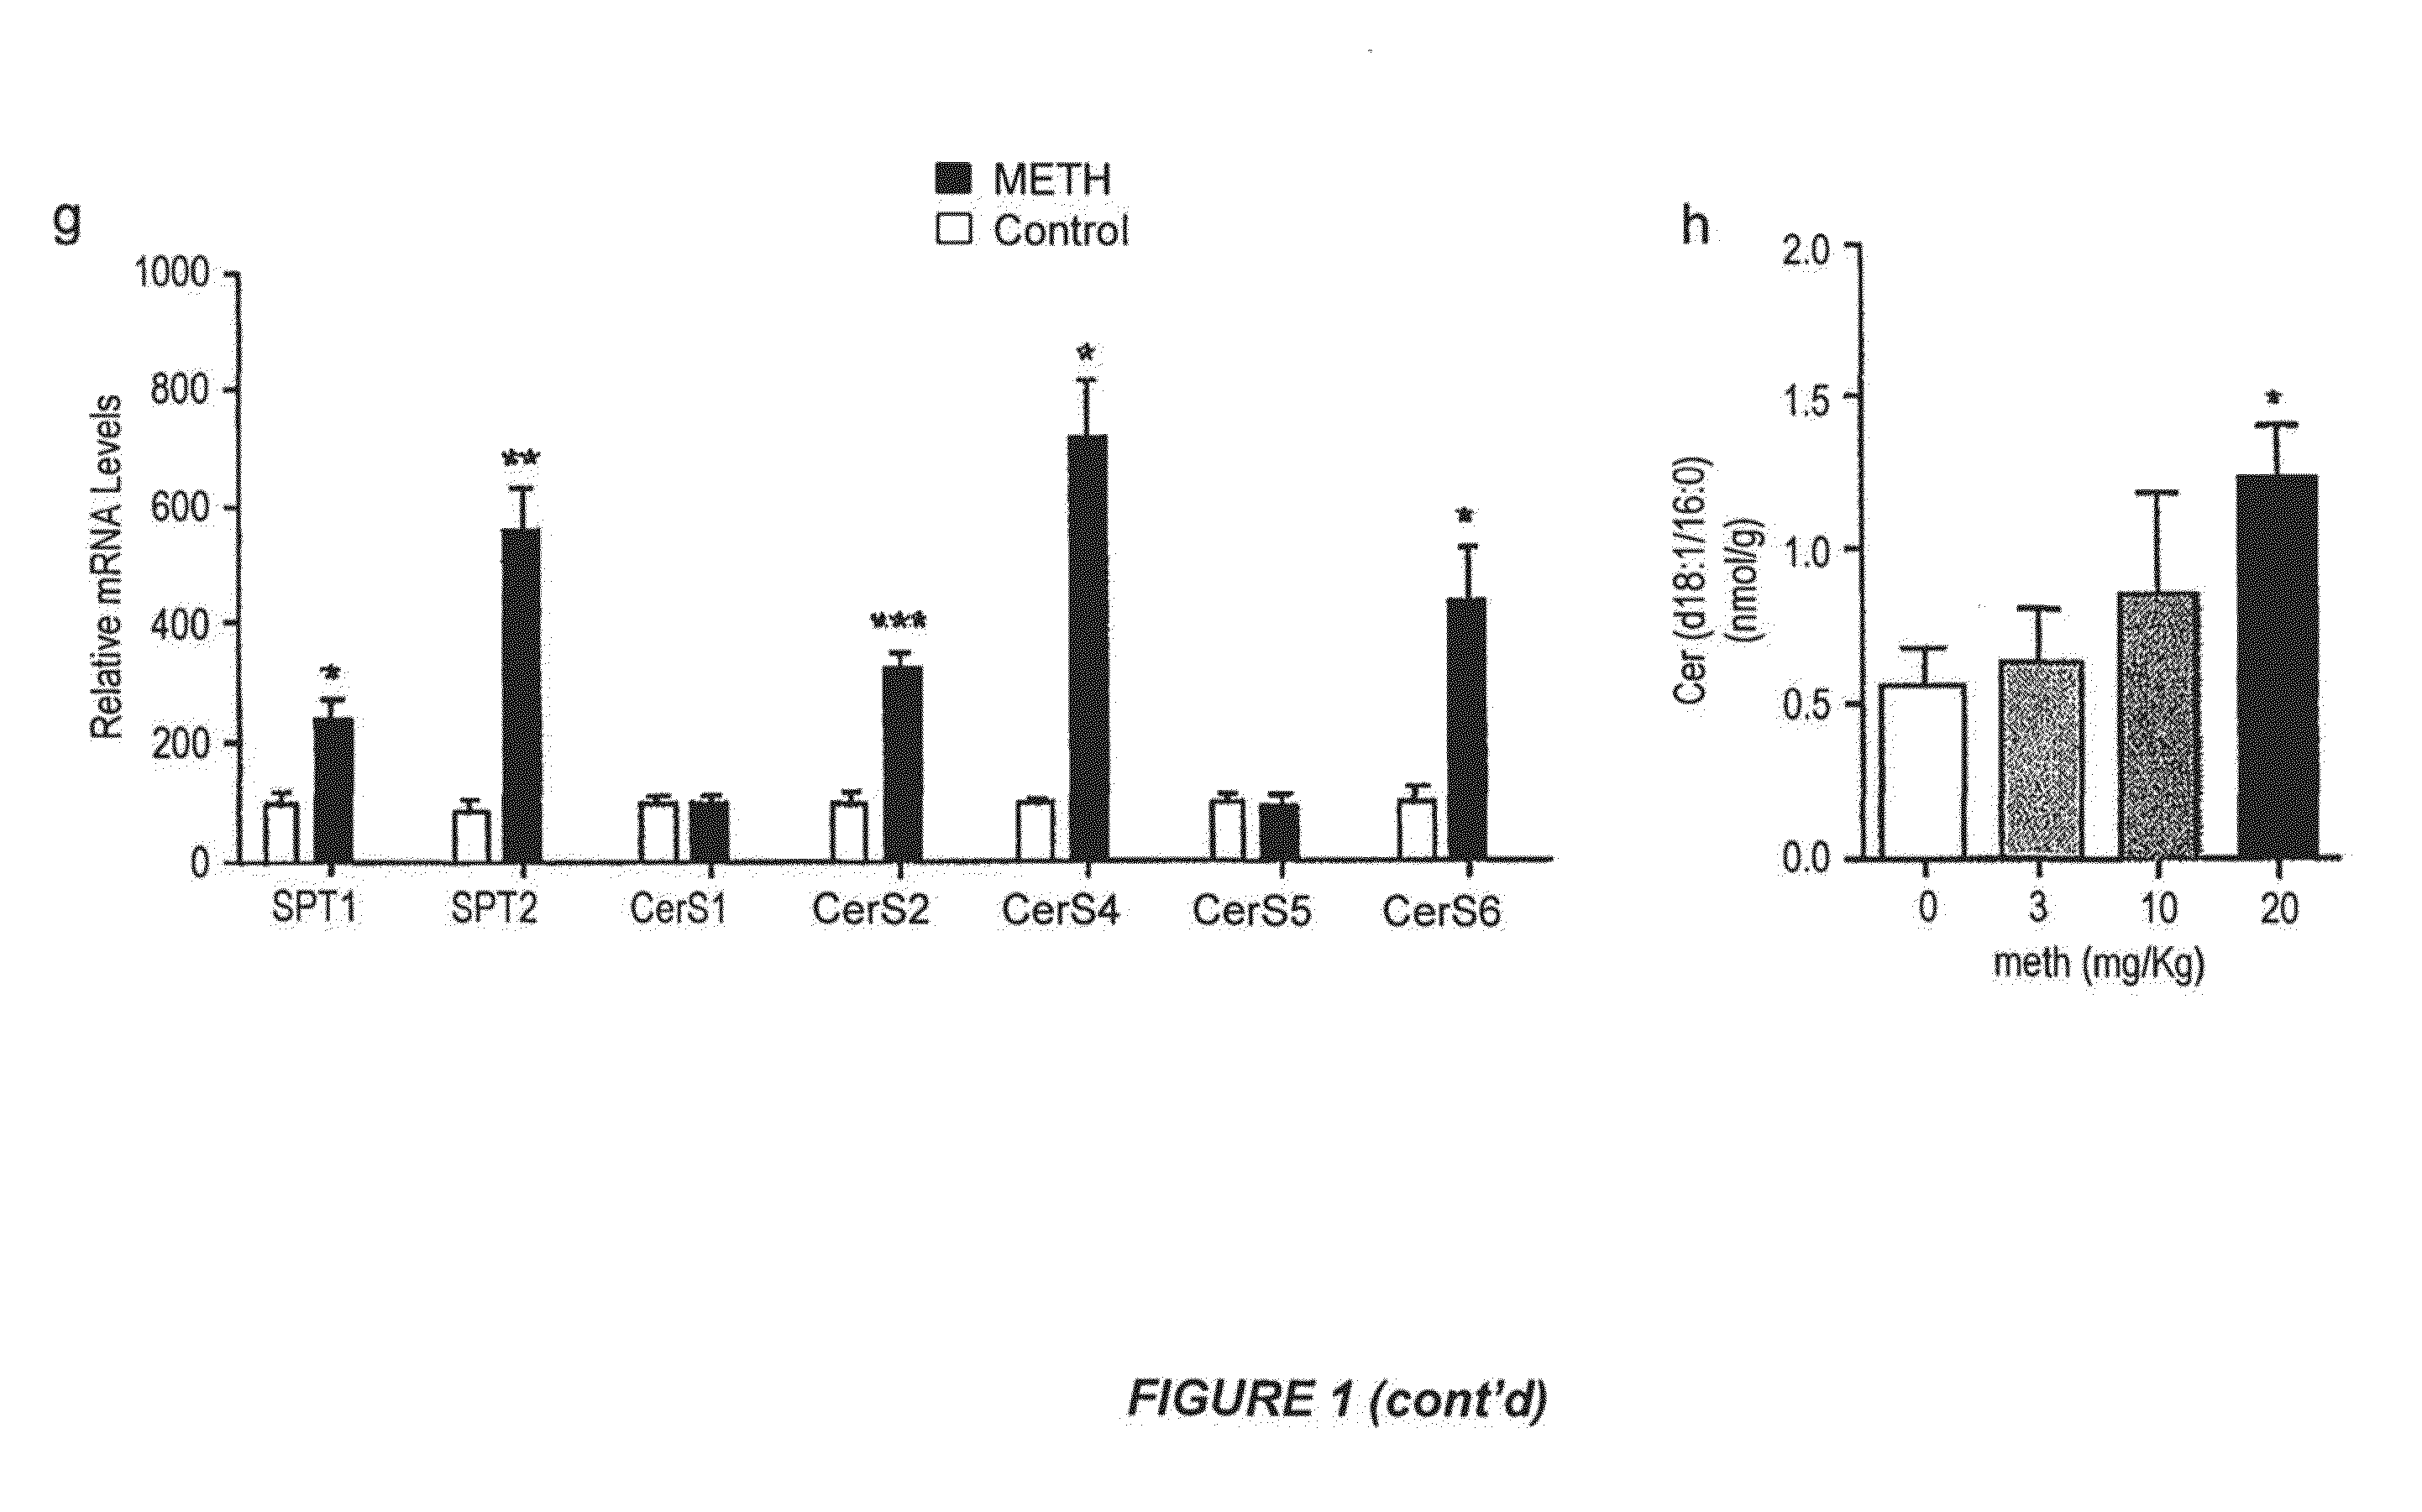 Methods of treatment, diagnosis and monitoring for methamphetamine toxicity which target ceramide metabolic pathways and cellular senescence